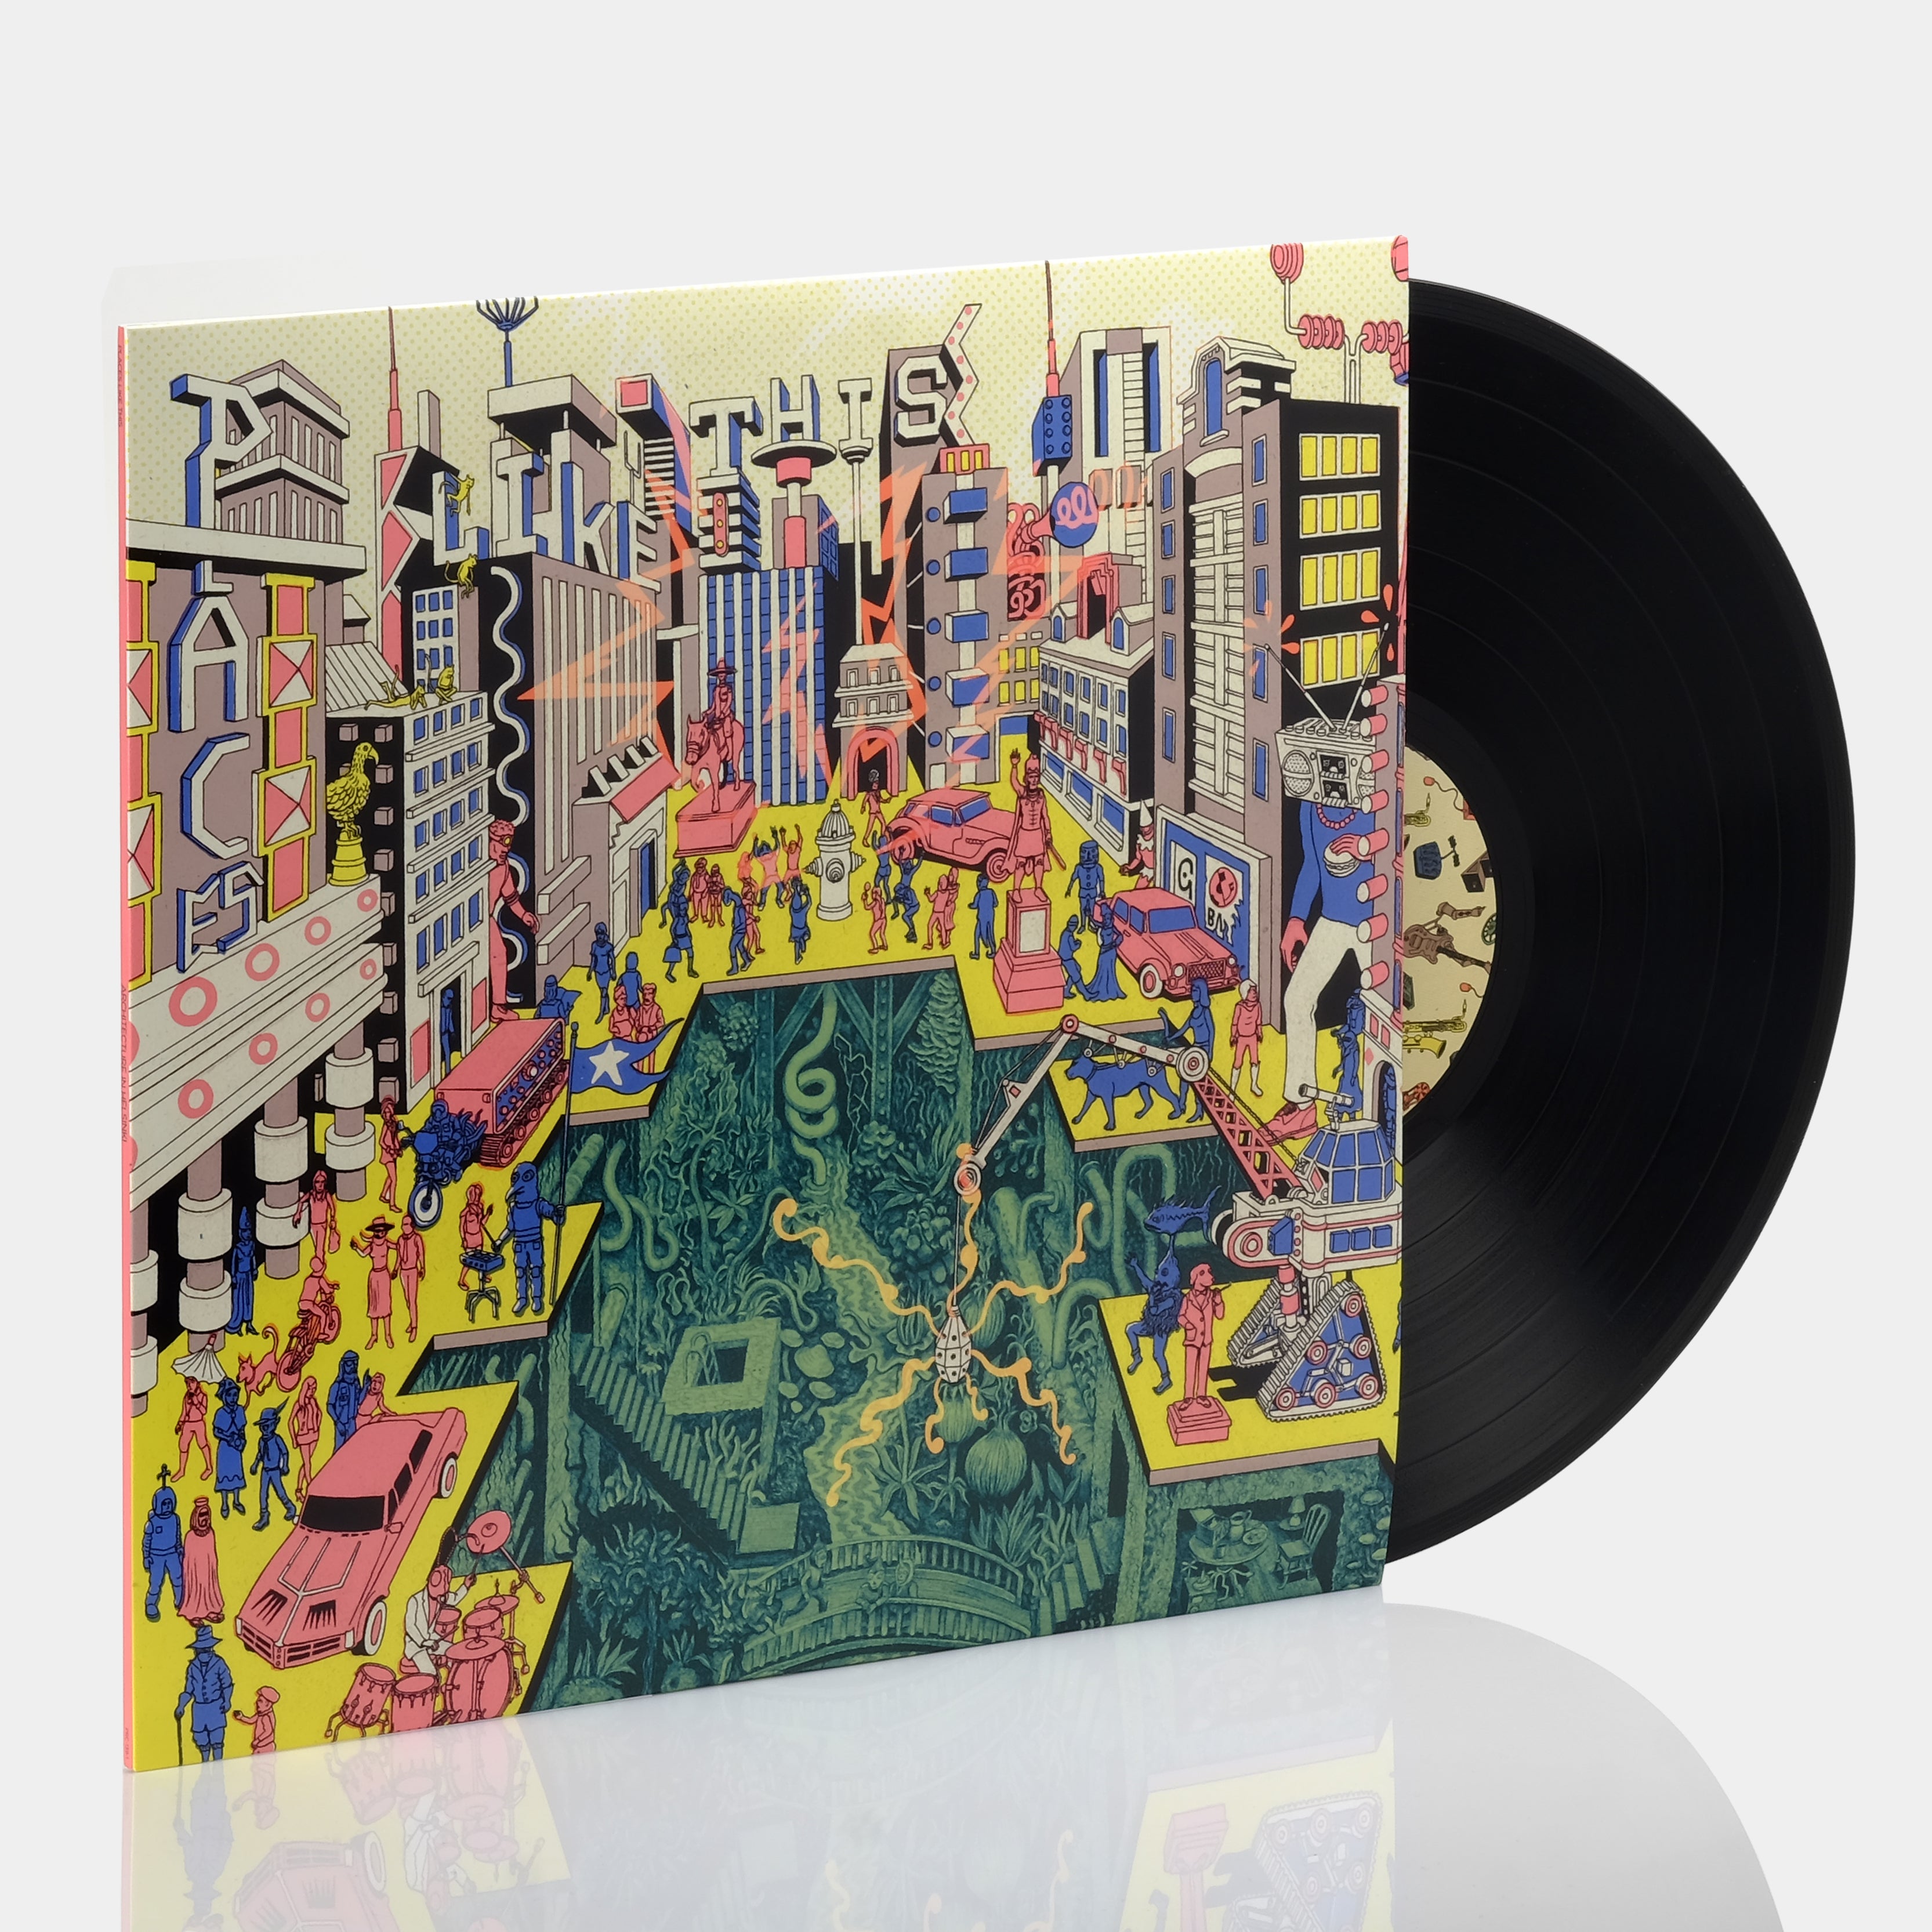 Architecture In Helsinki - Places Like This LP Vinyl Record